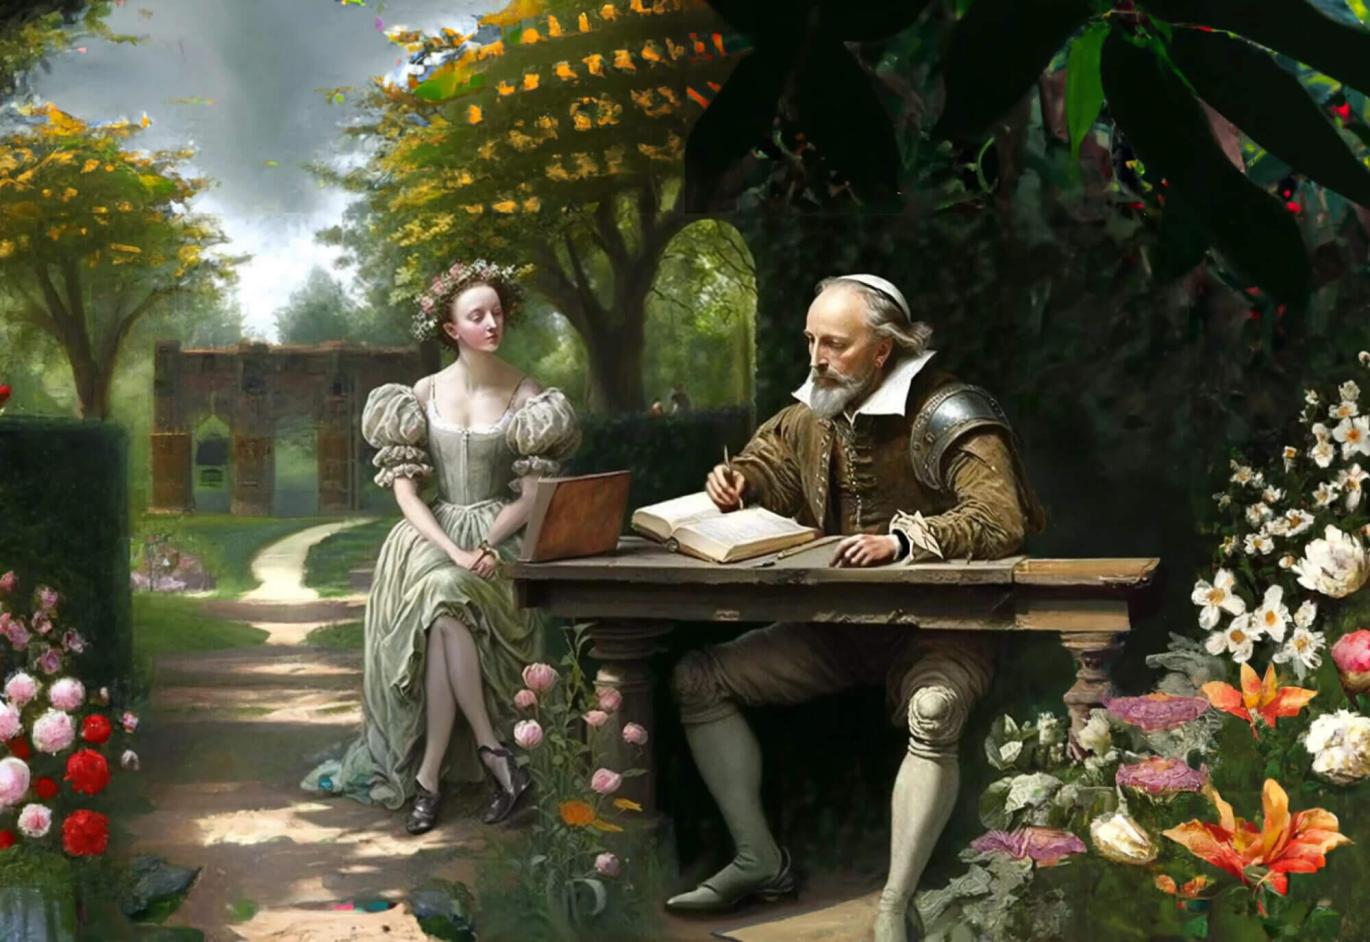 What Role Does Nature Play In Shakespeare's Sonnets, And How Does It Contribute To Their Meaning?